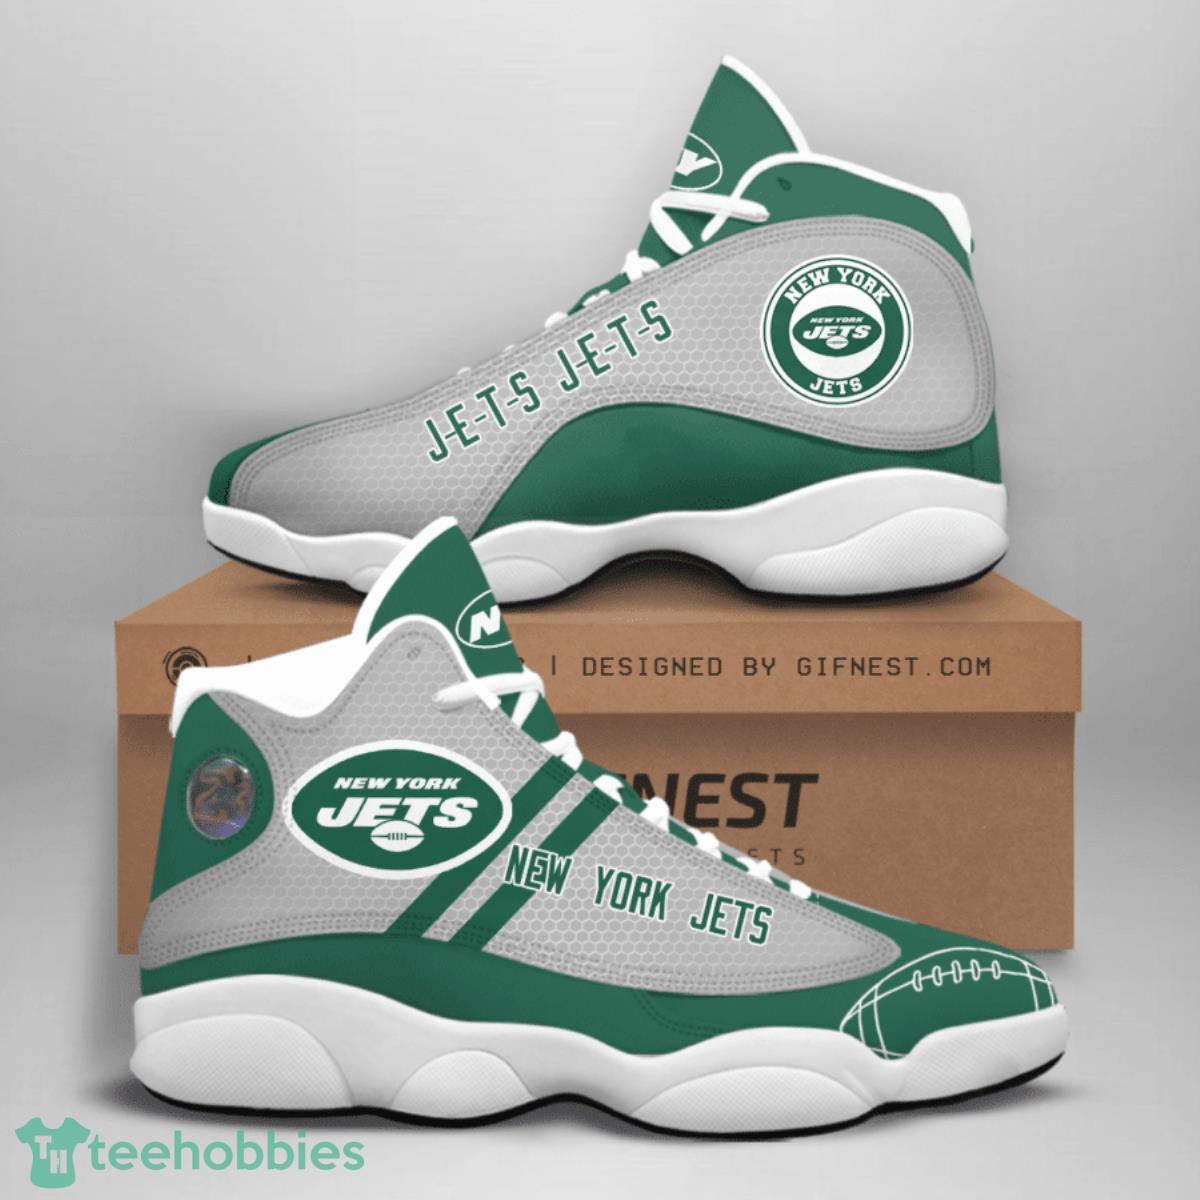 New York Jets Air Jordan 13 Sneakers Best Gift For Everyone Product Photo 1